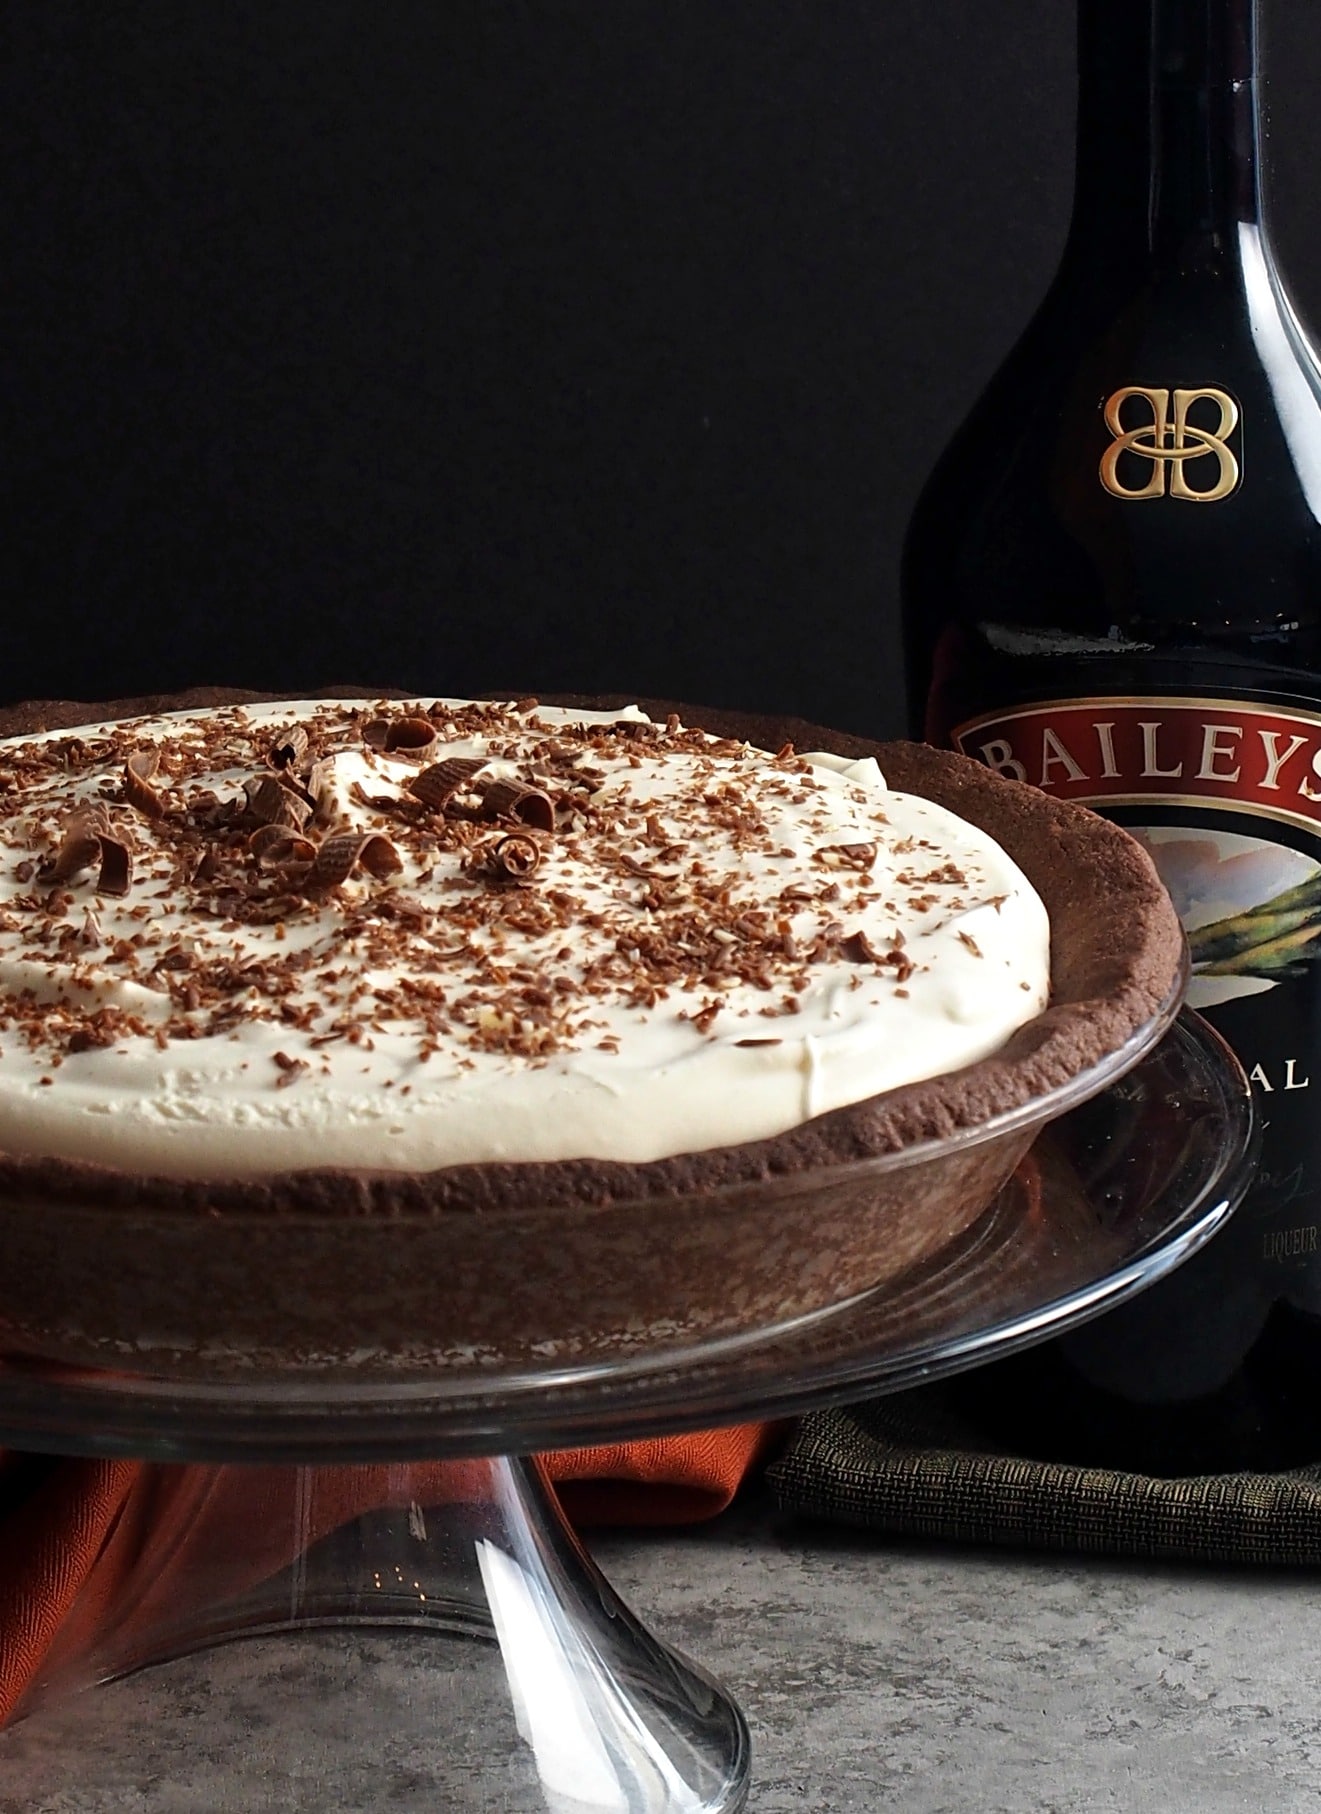 Irish Cream Pie. Even if your eyes aren't Irish, they will be smiling after one bite of this deliciously creamy pie with chocolate crust & chocolate curls. Simply Sated